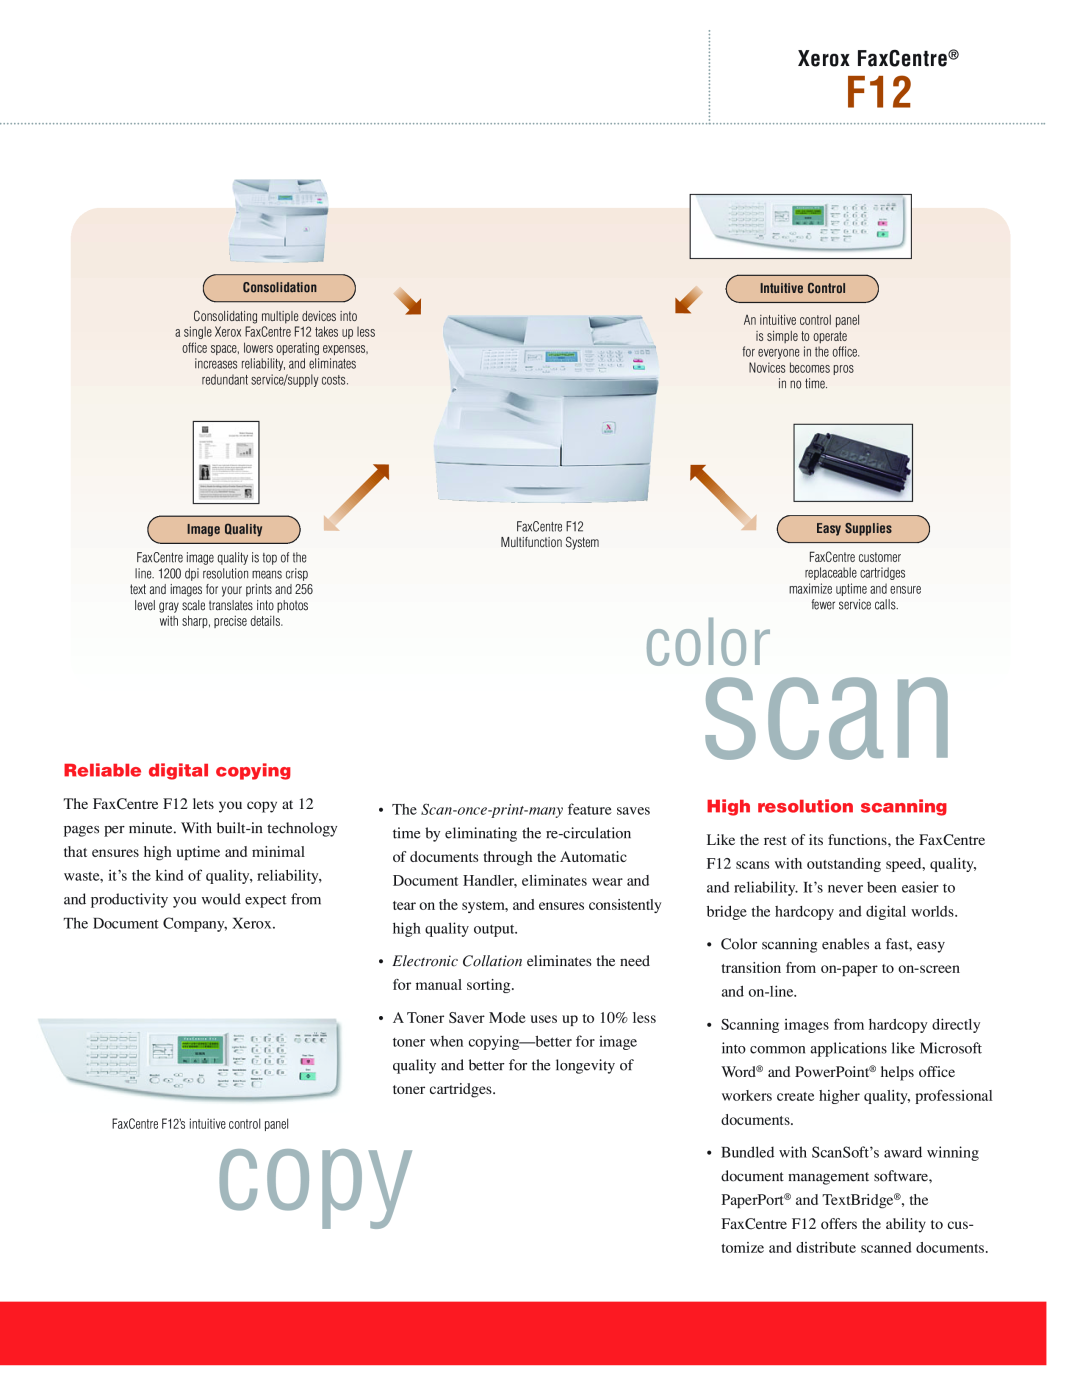 Xerox F12 manual Reliable digital copying, High resolution scanning, color, Xerox FaxCentre 